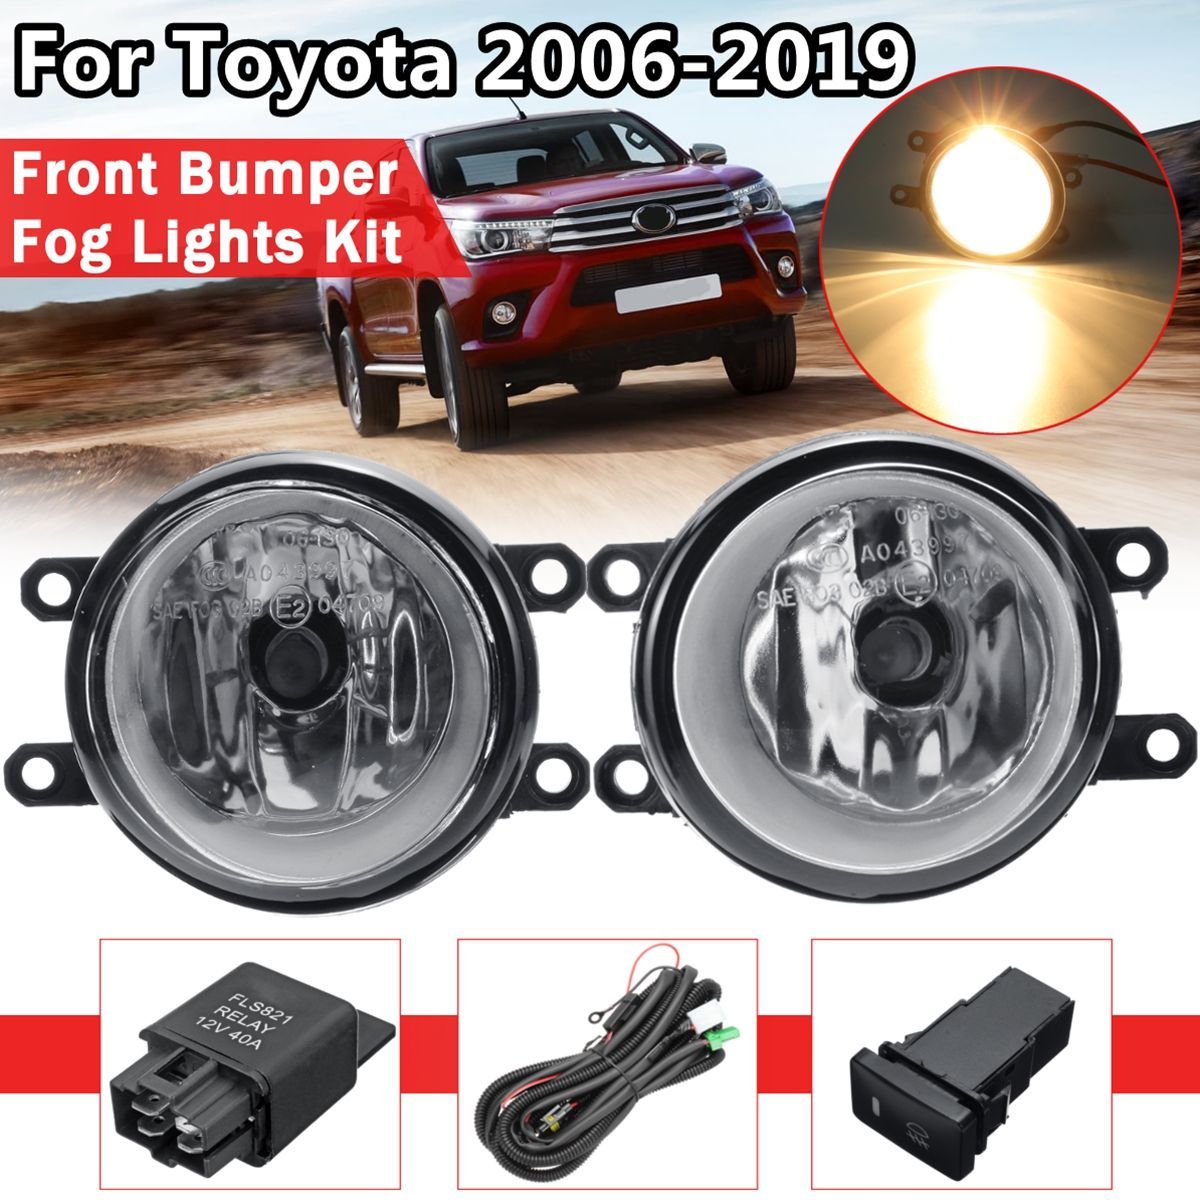 2Pcs-Car-Front-Bumper-Fog-Light-Lamp-With-H11-Bulb-Universal-For-Toyota-2006-2019-1674271